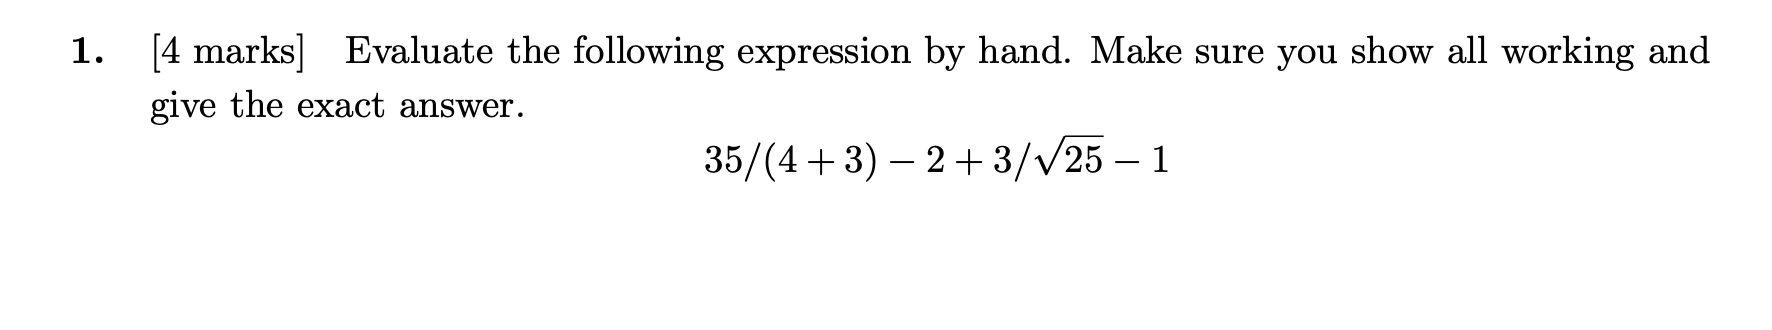 1 4 Marks Evaluate The Following Expression By Hand Make Sure You Show All Working And Give The Exact Answer 35 4 1